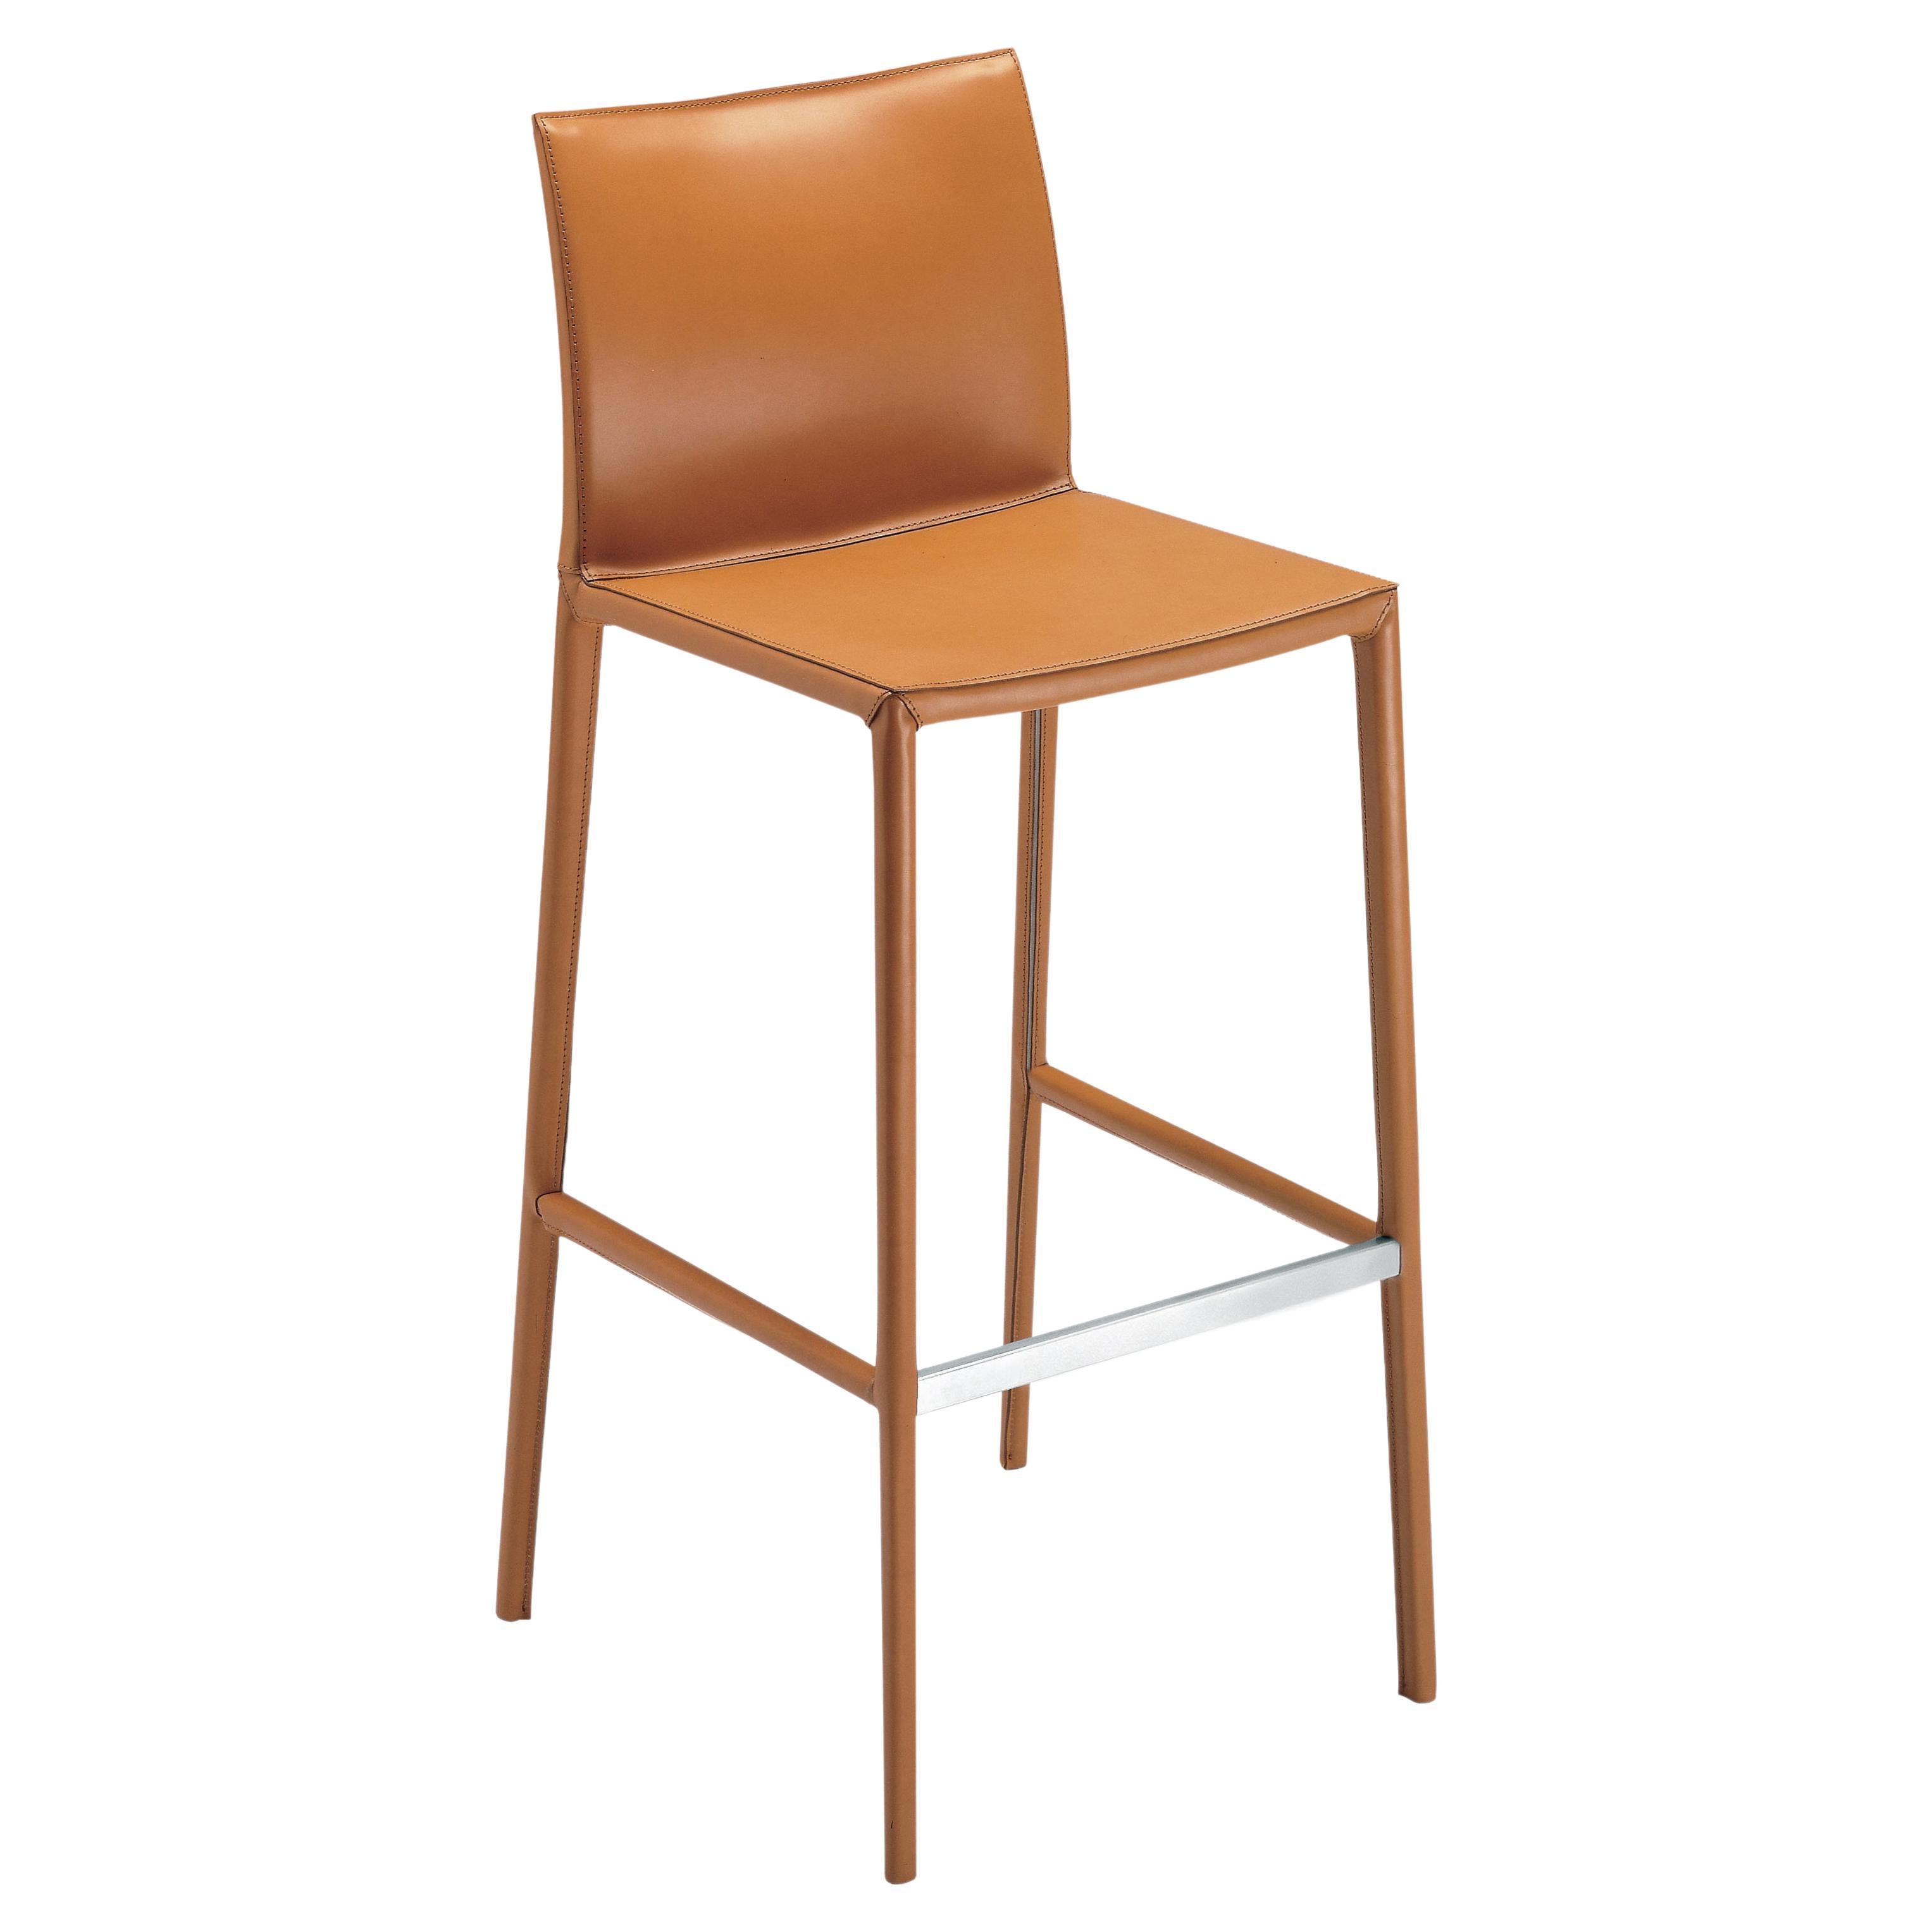 Zanotta Small Leo Stool in Brown Leather Upholstery and Aluminum Frame For Sale